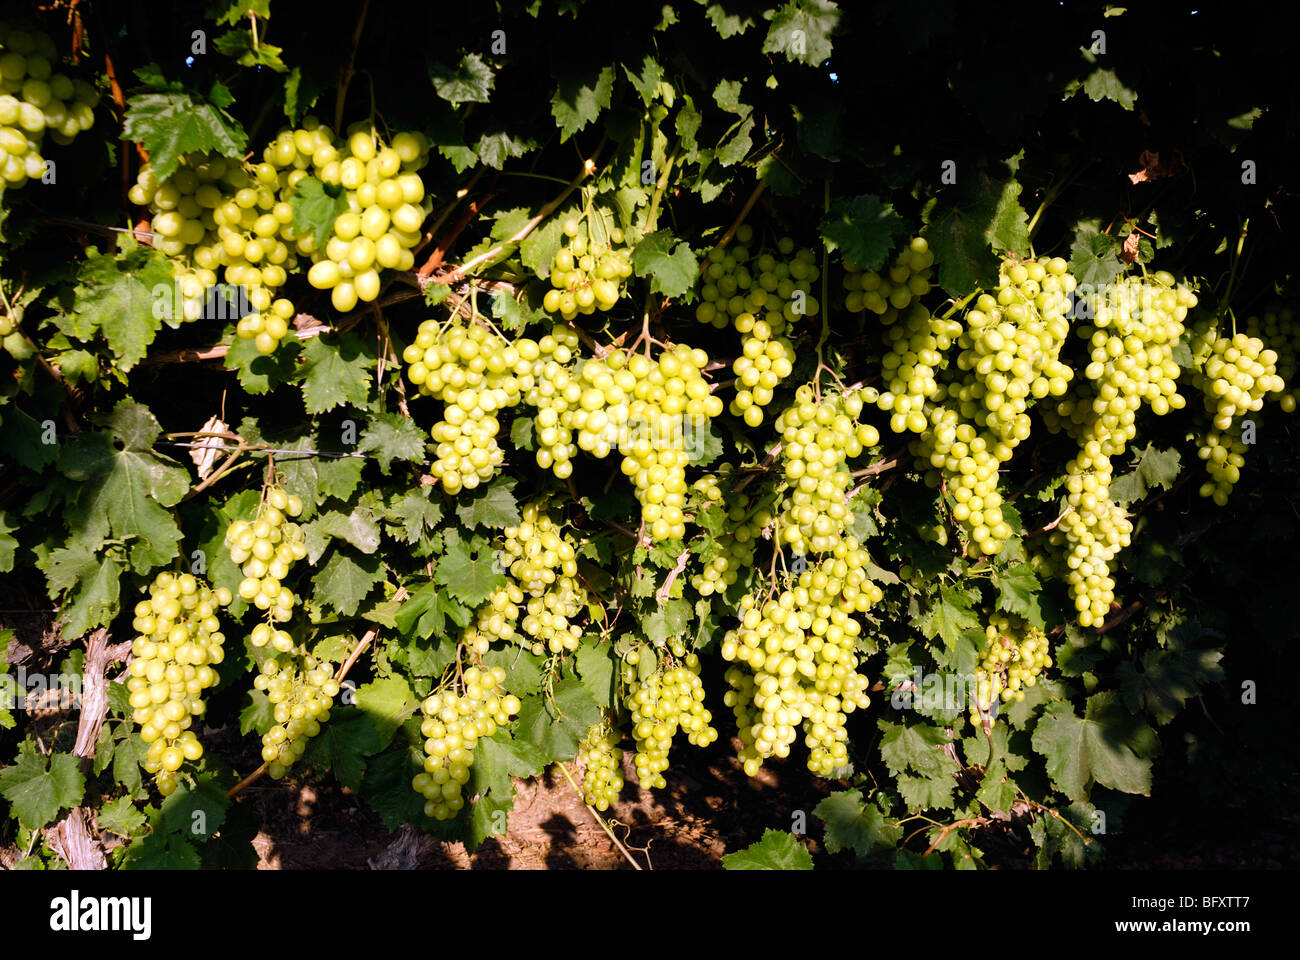 Israel, Negev, Lachish Region, Vineyard, Close up of a cluster of unripe grapes Stock Photo